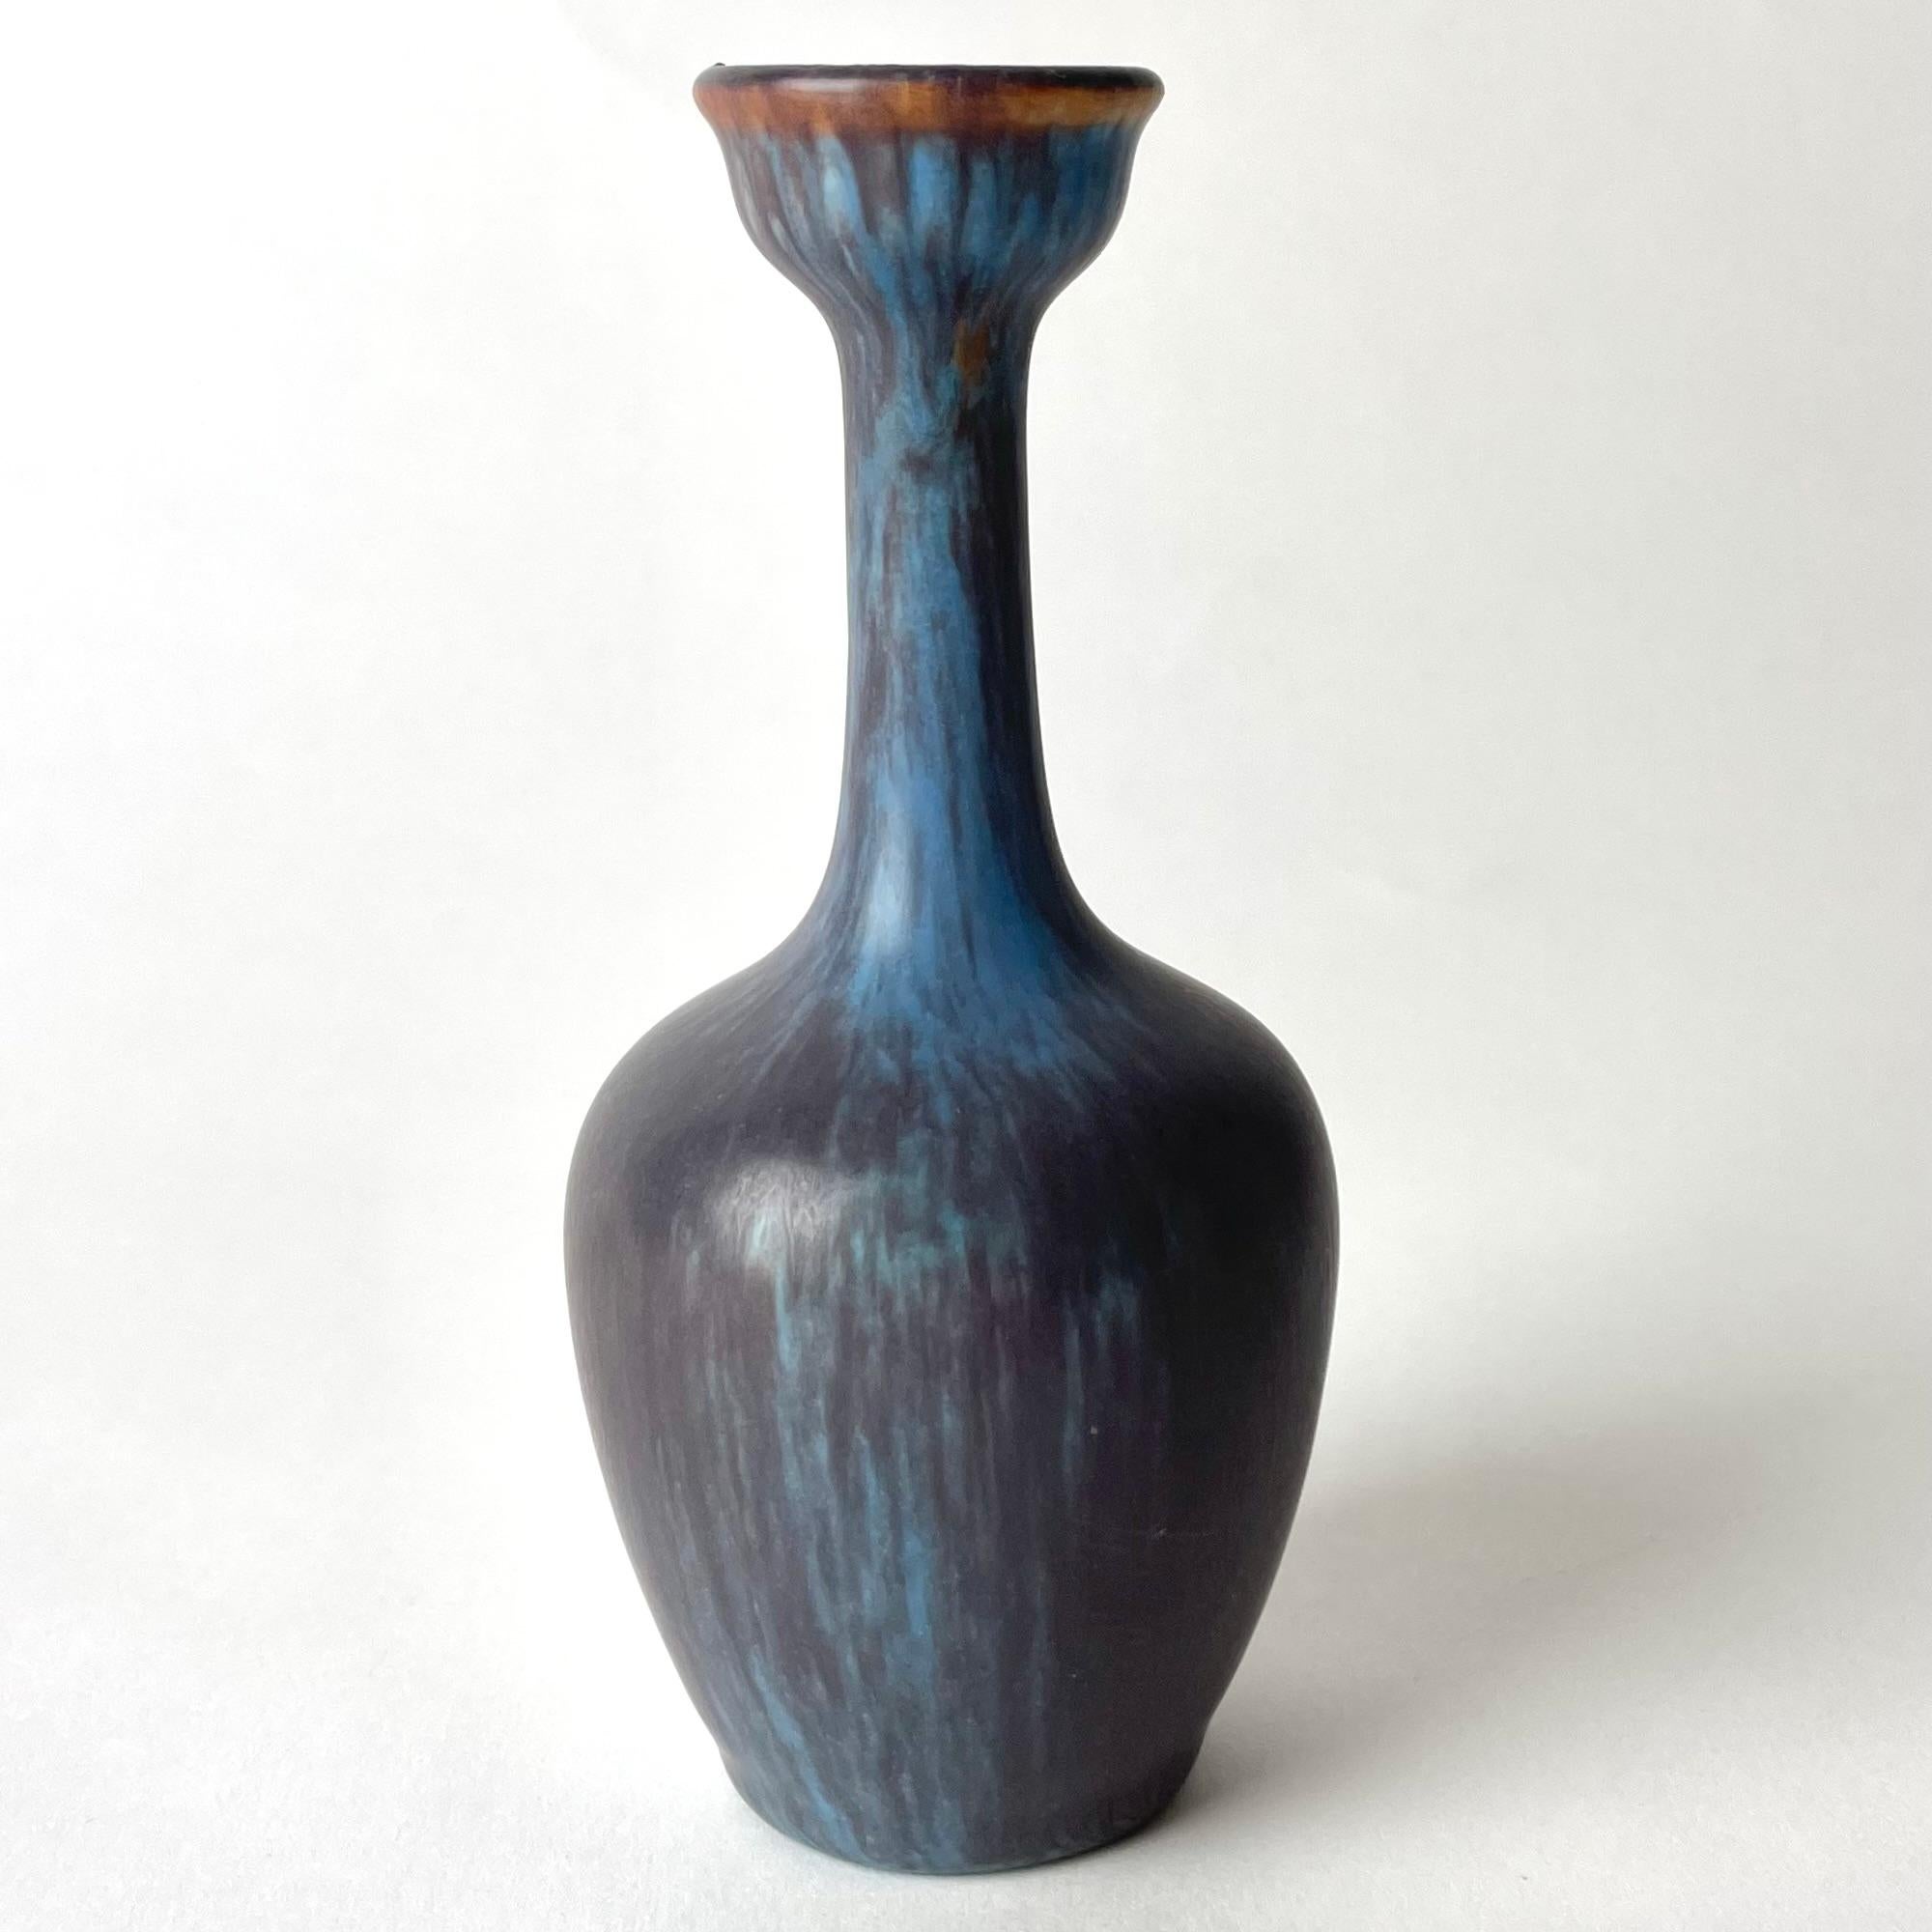 Elegant Stoneware Vase by Gunnar Nylund (1904-1997), Rörstrands Porslinsfabrik, Sweden. Very period design from Mid-20th Century. Beautiful color.

Wear consistent with age and use 